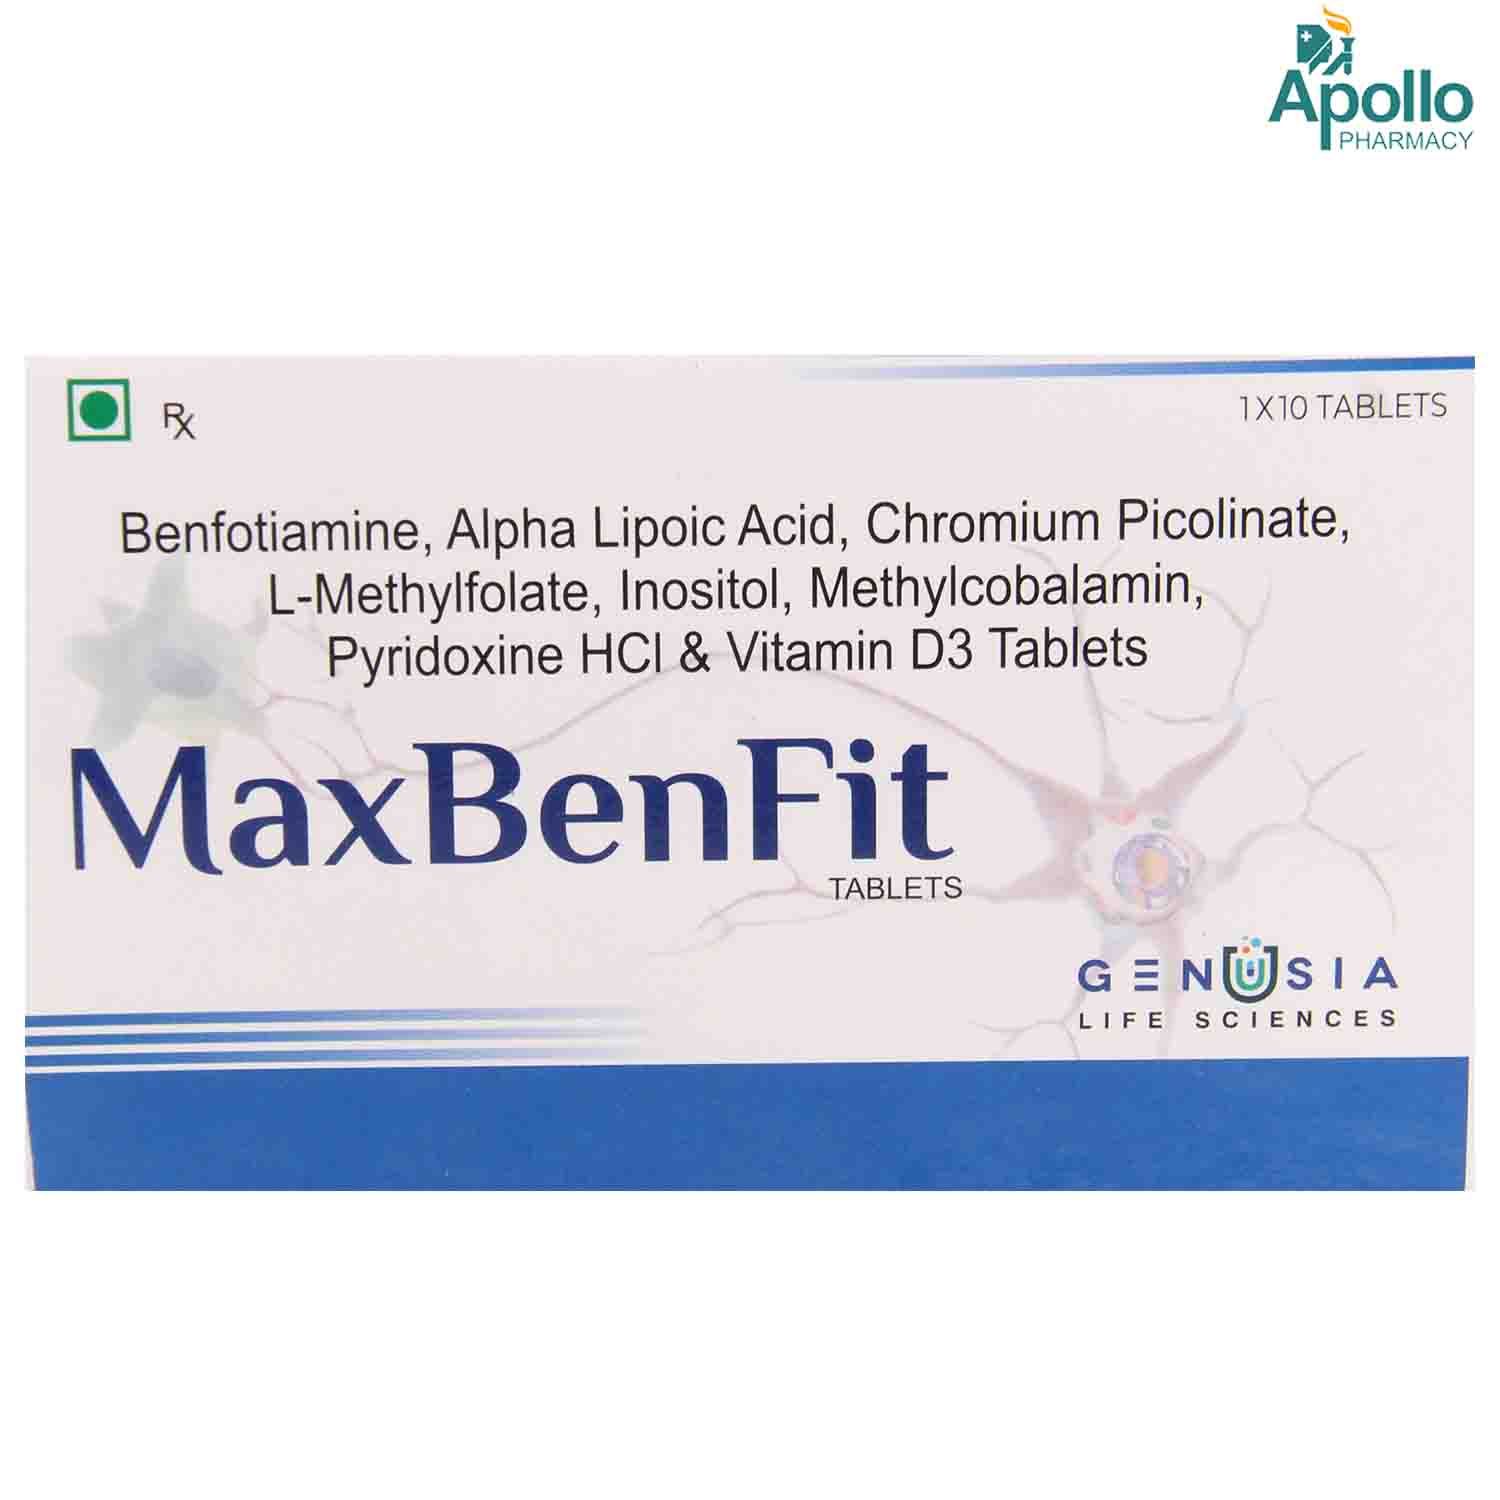 MaxBenfit Tablet 10's Price, Uses, Side Effects, Composition - Apollo